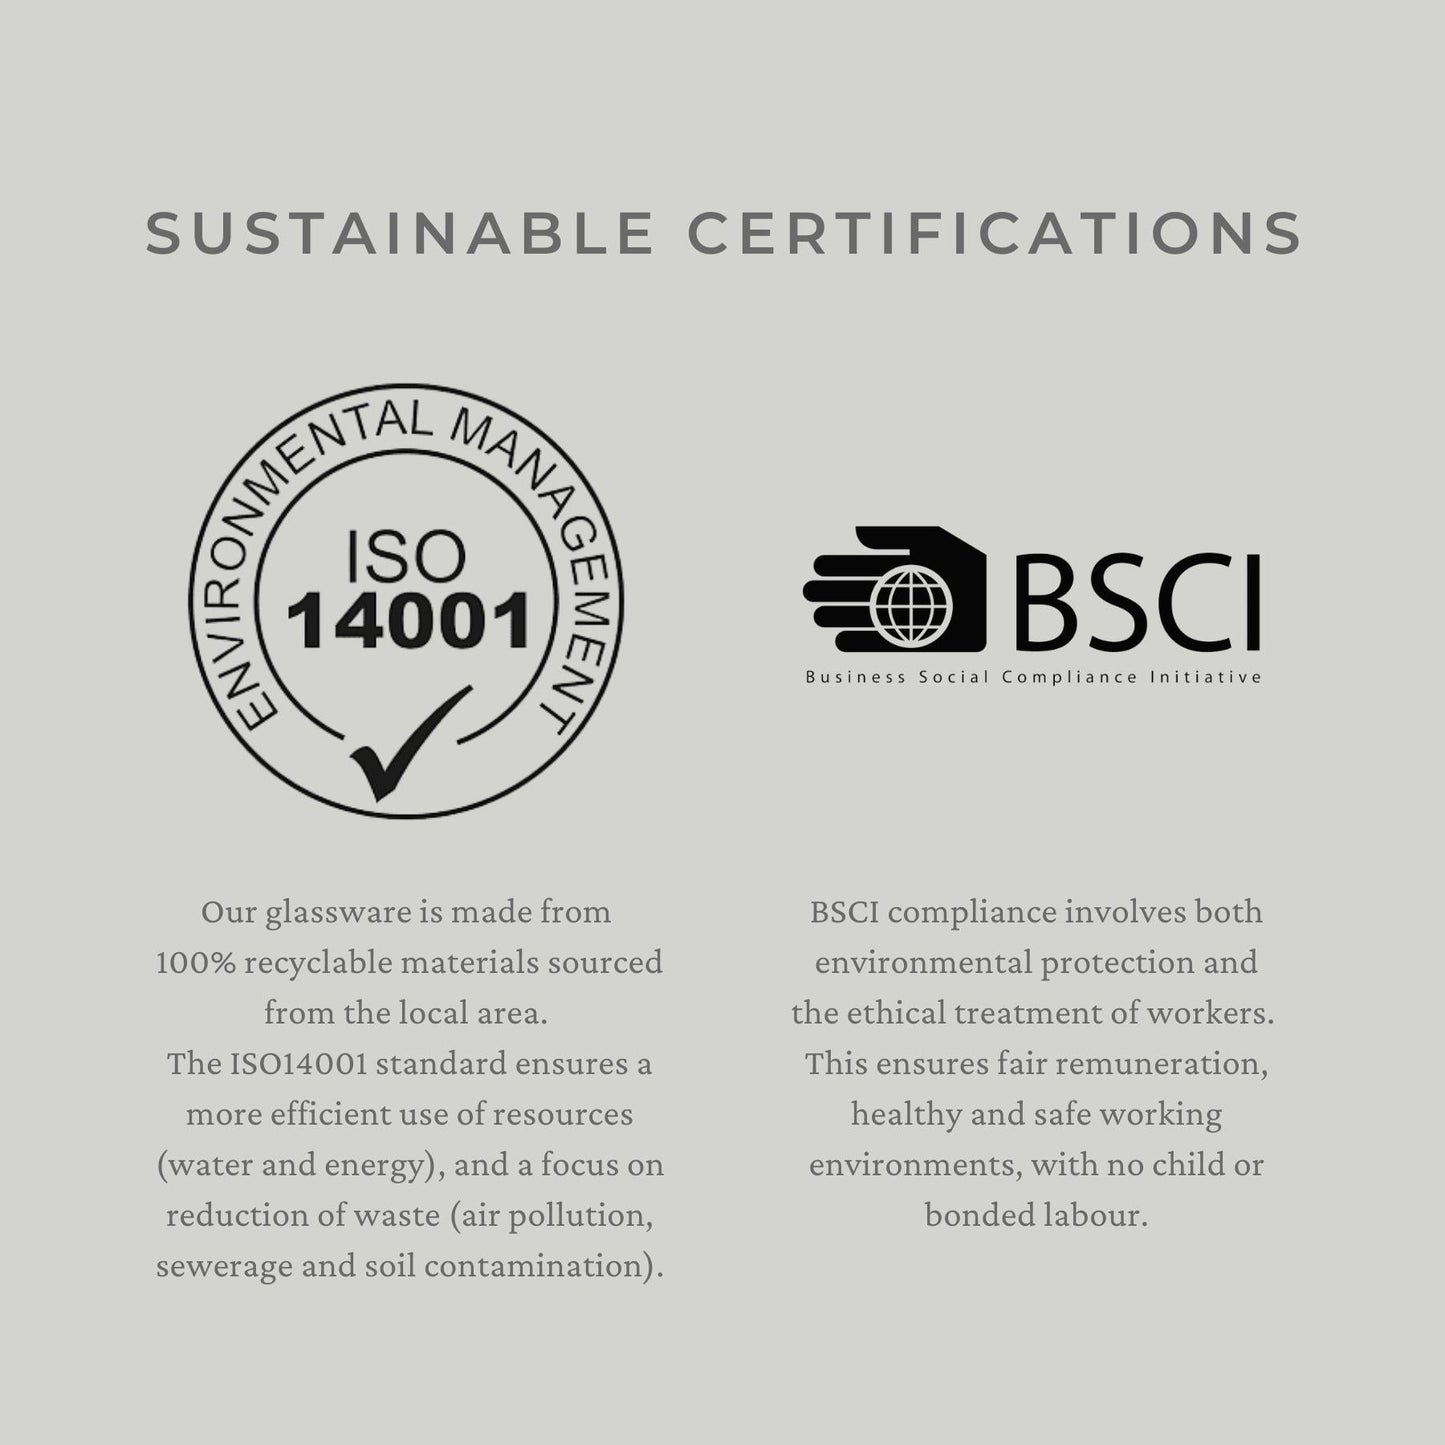 Sustainable certifications - Our glassware is made from  100% recyclable materials sourced from the local area.  The ISO14001 standard ensures a more efficient use of resources (water and energy), and a focus on reduction of waste (air pollution, sewerage and soil contamination). BSCI compliance involves both environmental protection and the ethical treatment of workers.  This ensures fair remuneration, healthy and safe working environments, with no child or bonded labour.